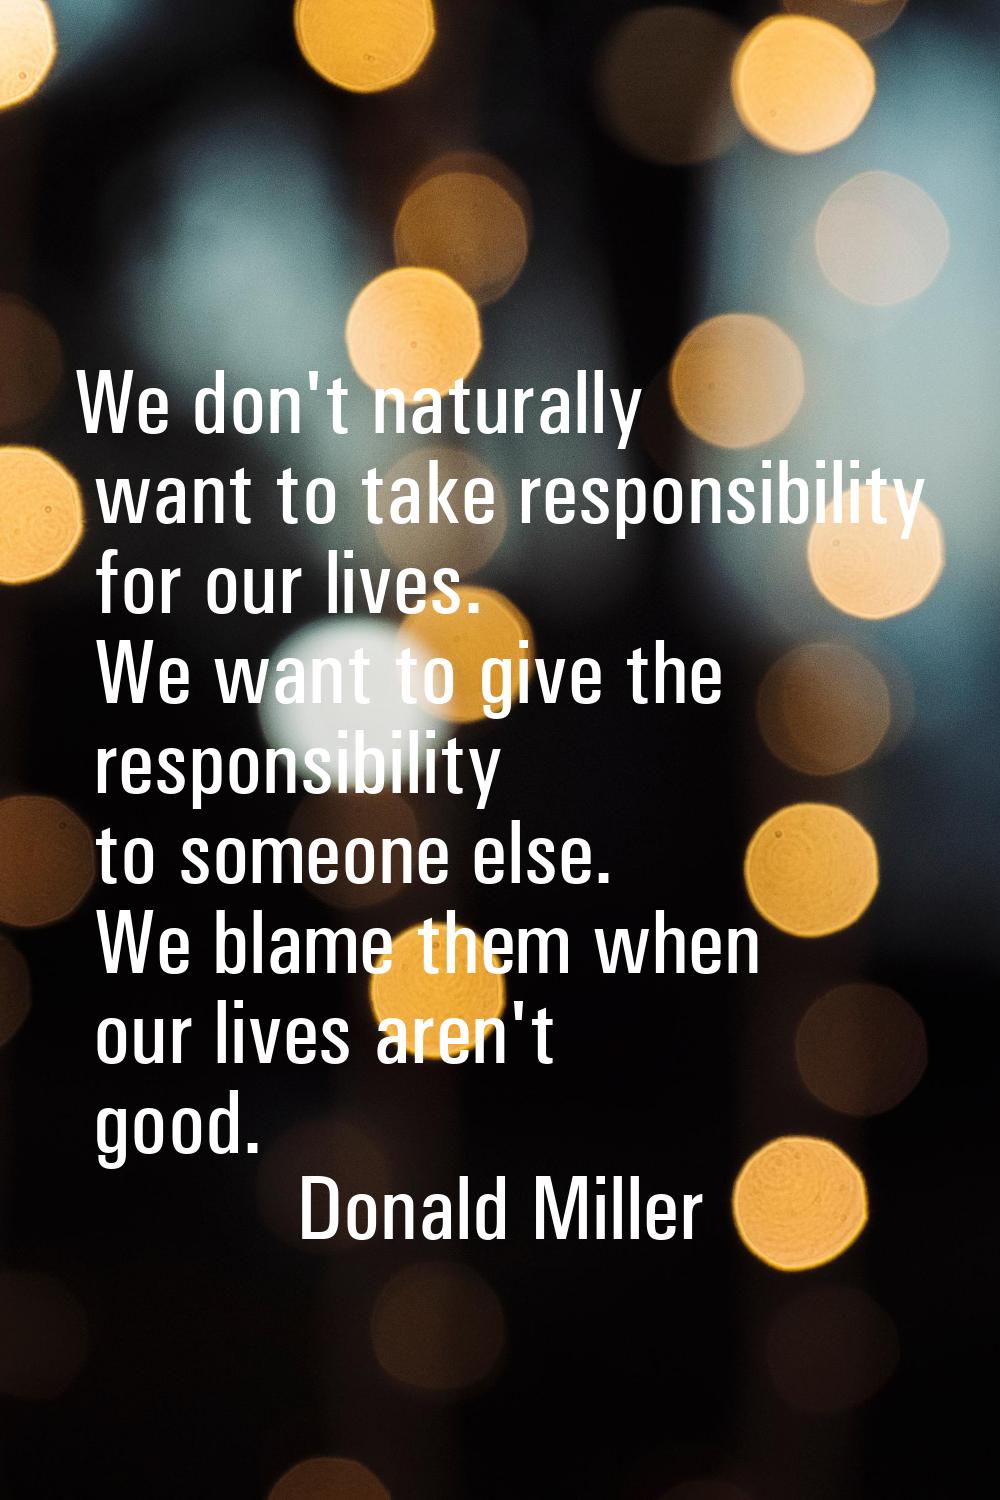 We don't naturally want to take responsibility for our lives. We want to give the responsibility to